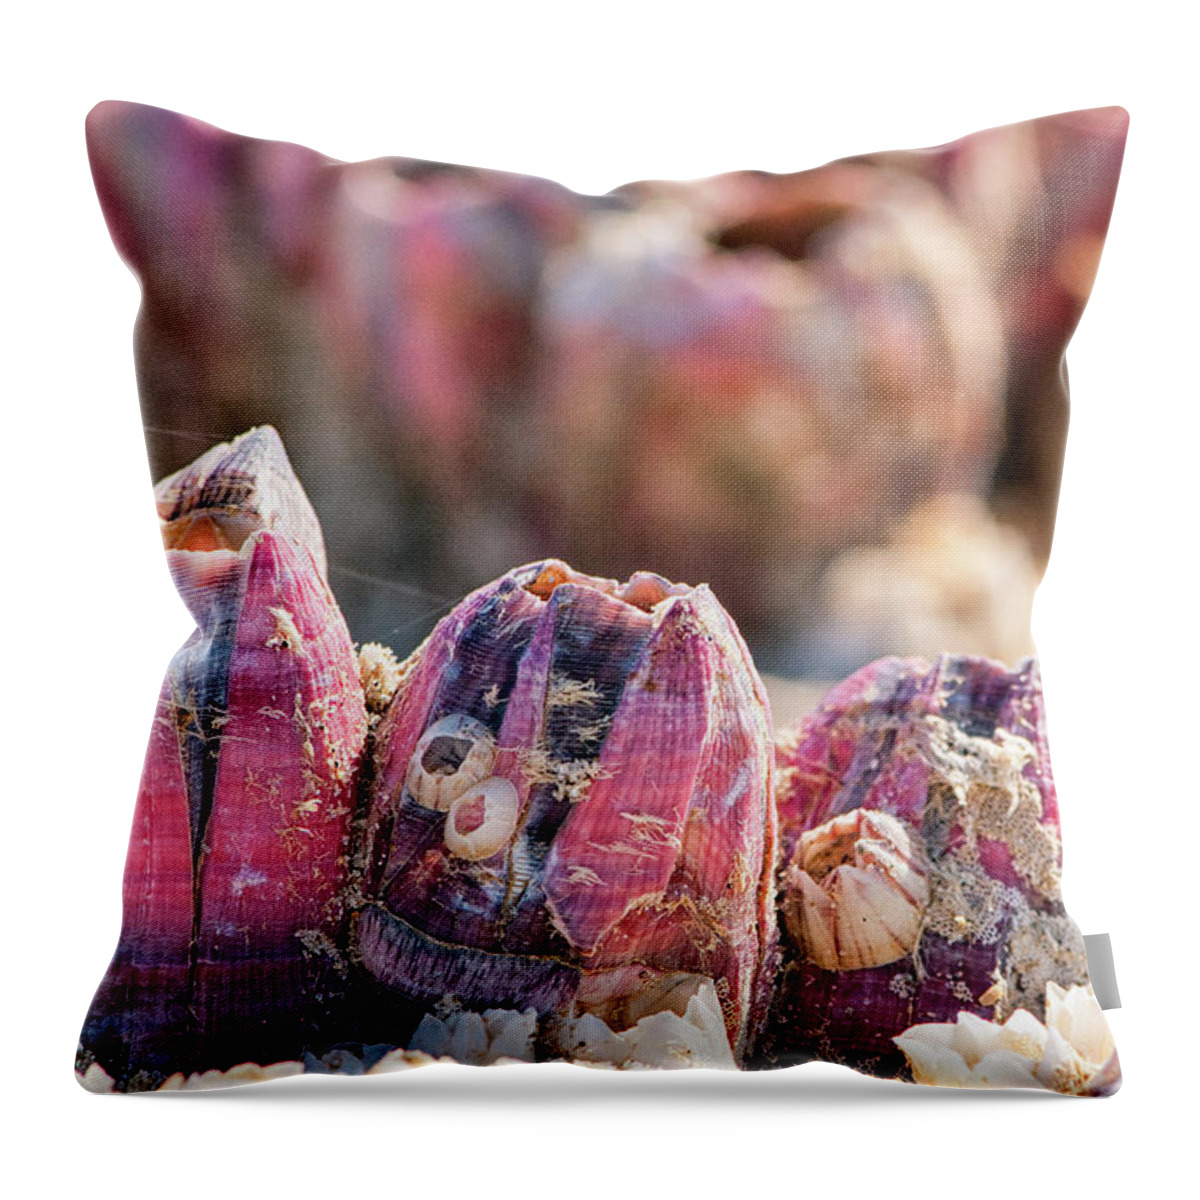 Barnacles Throw Pillow featuring the photograph More Barnacles by Victor Culpepper